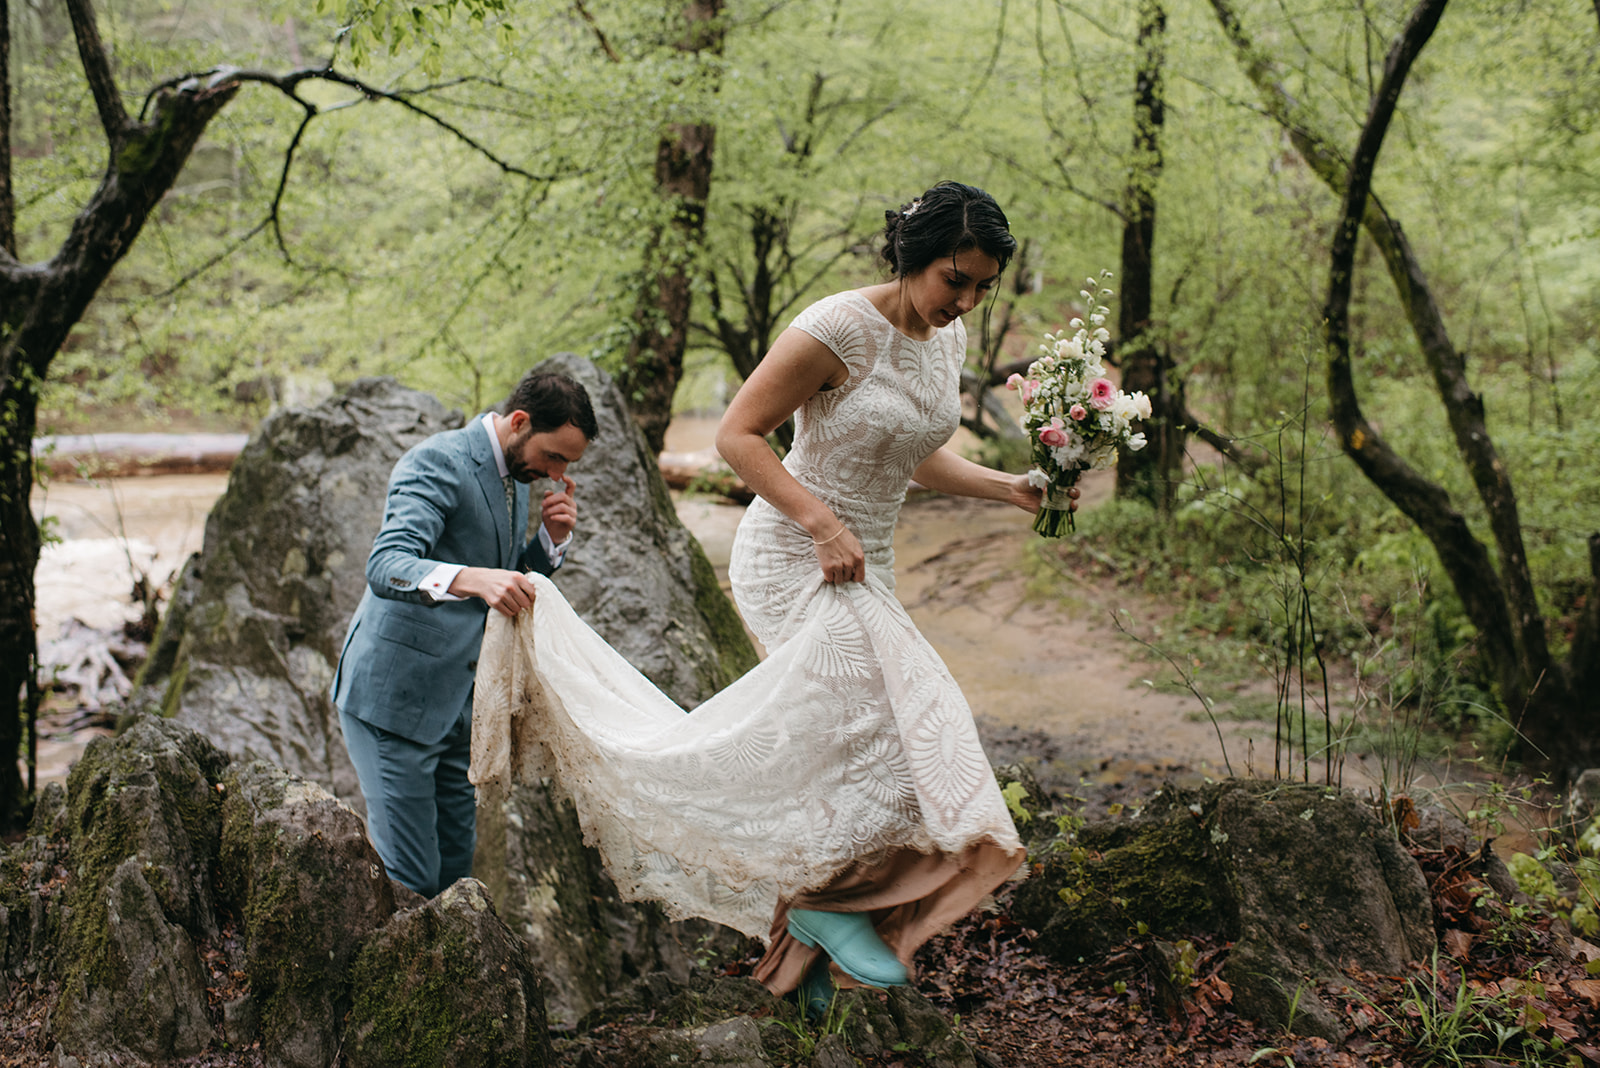 Eno River State Park Elopement in the Rain as a Durham Wedding Photographer 